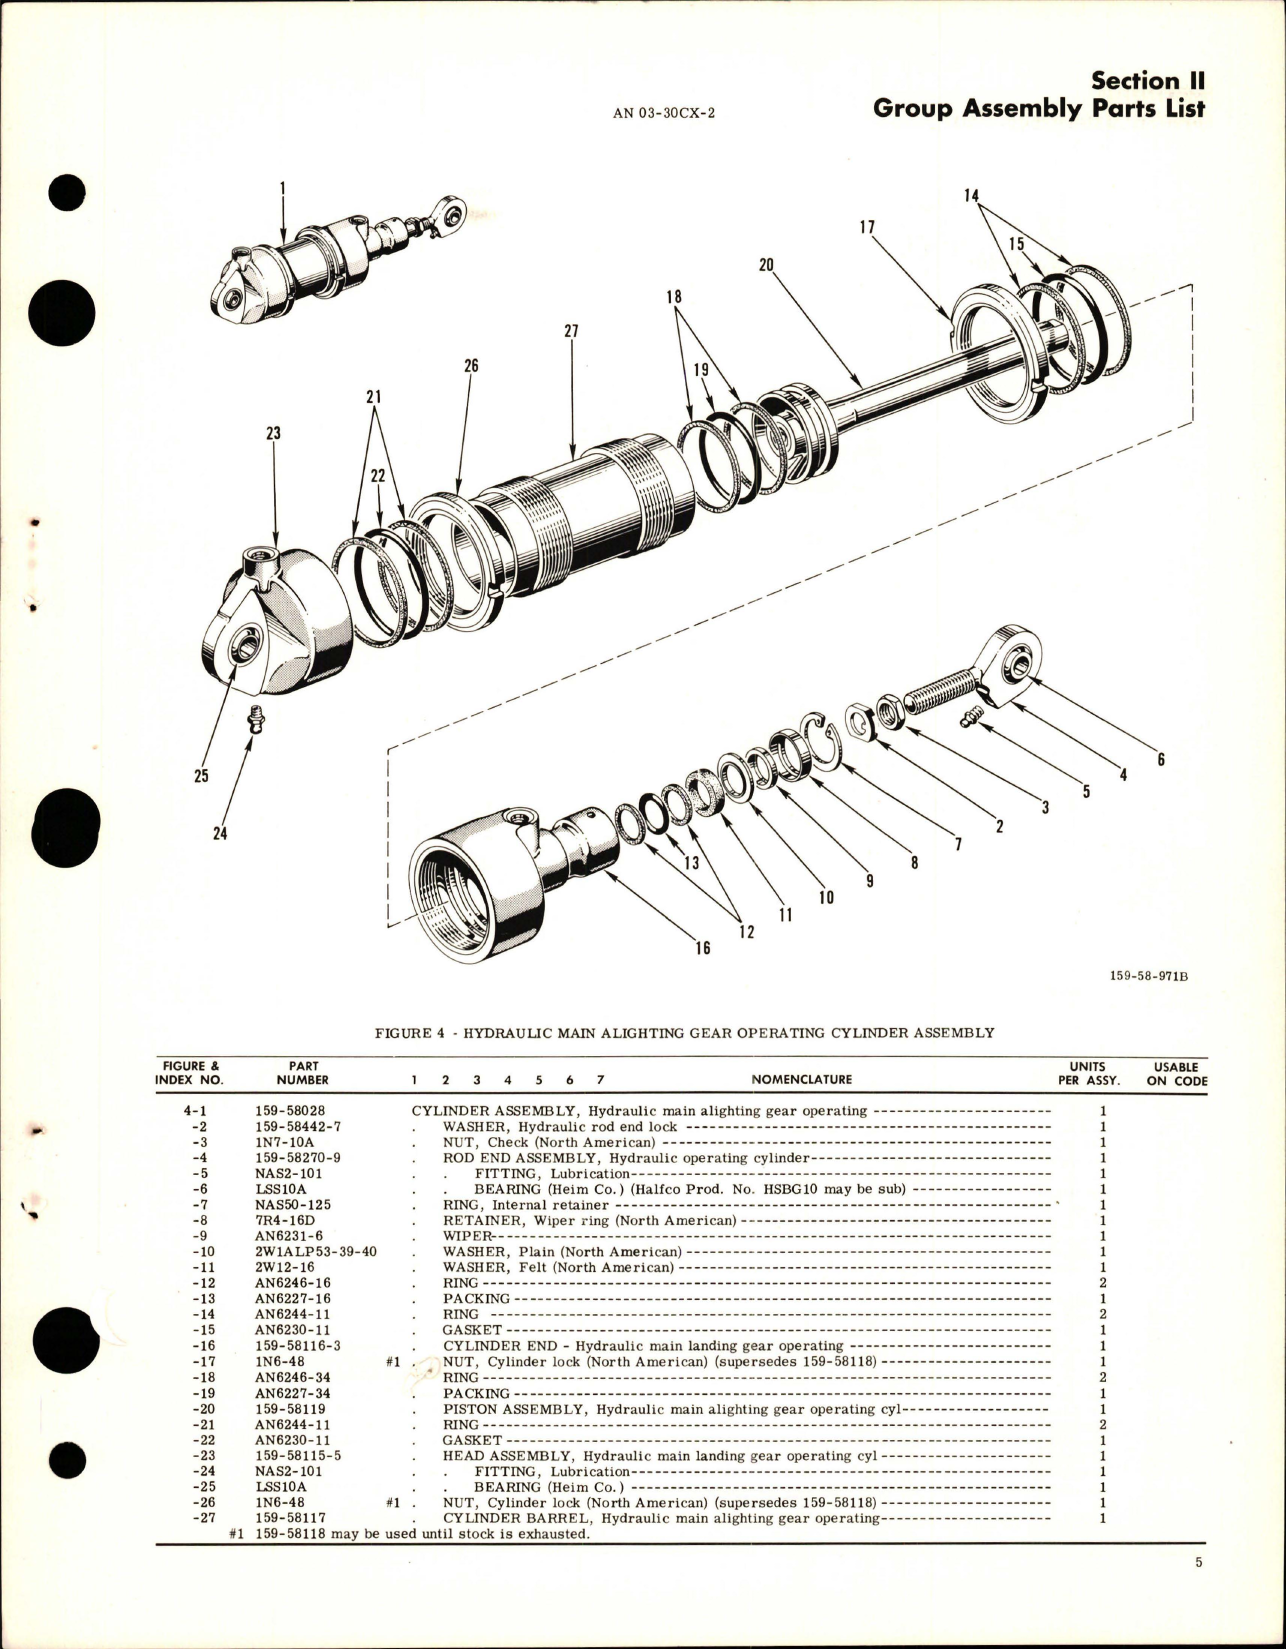 Sample page 9 from AirCorps Library document: Illustrated Parts Breakdown for Hydraulic Actuating Cylinders 